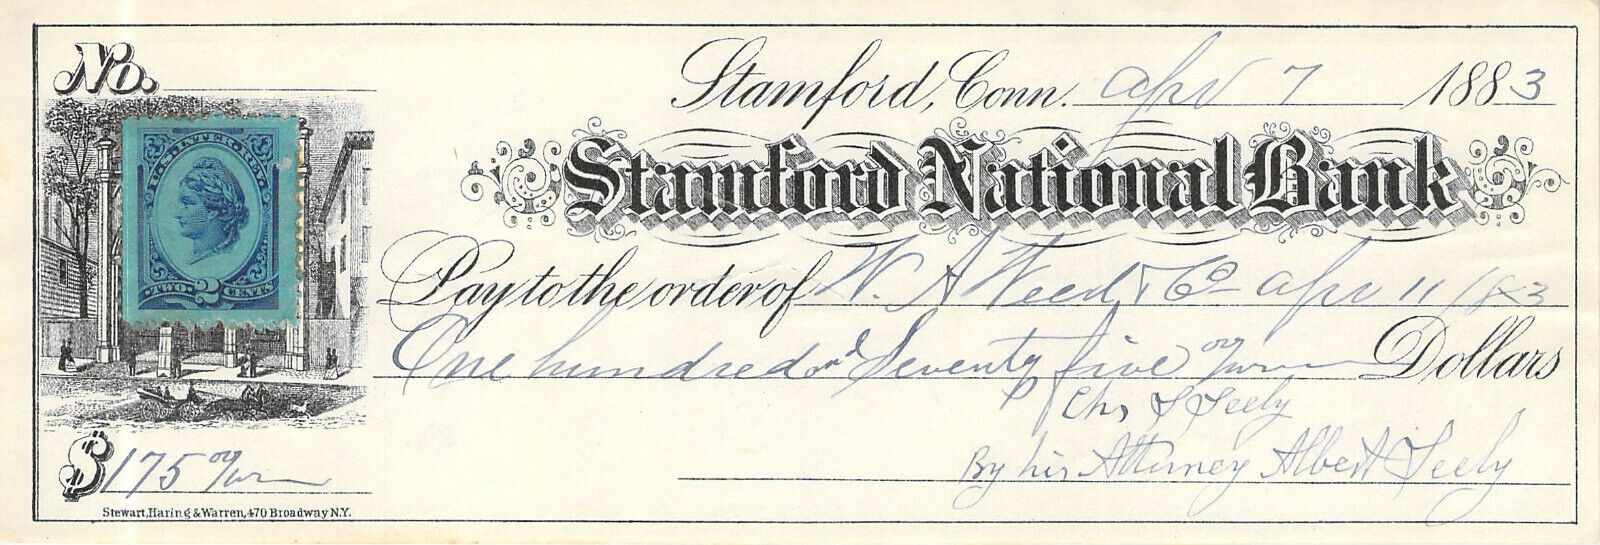 1883 W A WEED STAMFORD CONNECTICUT BANK REVENUE STAMP